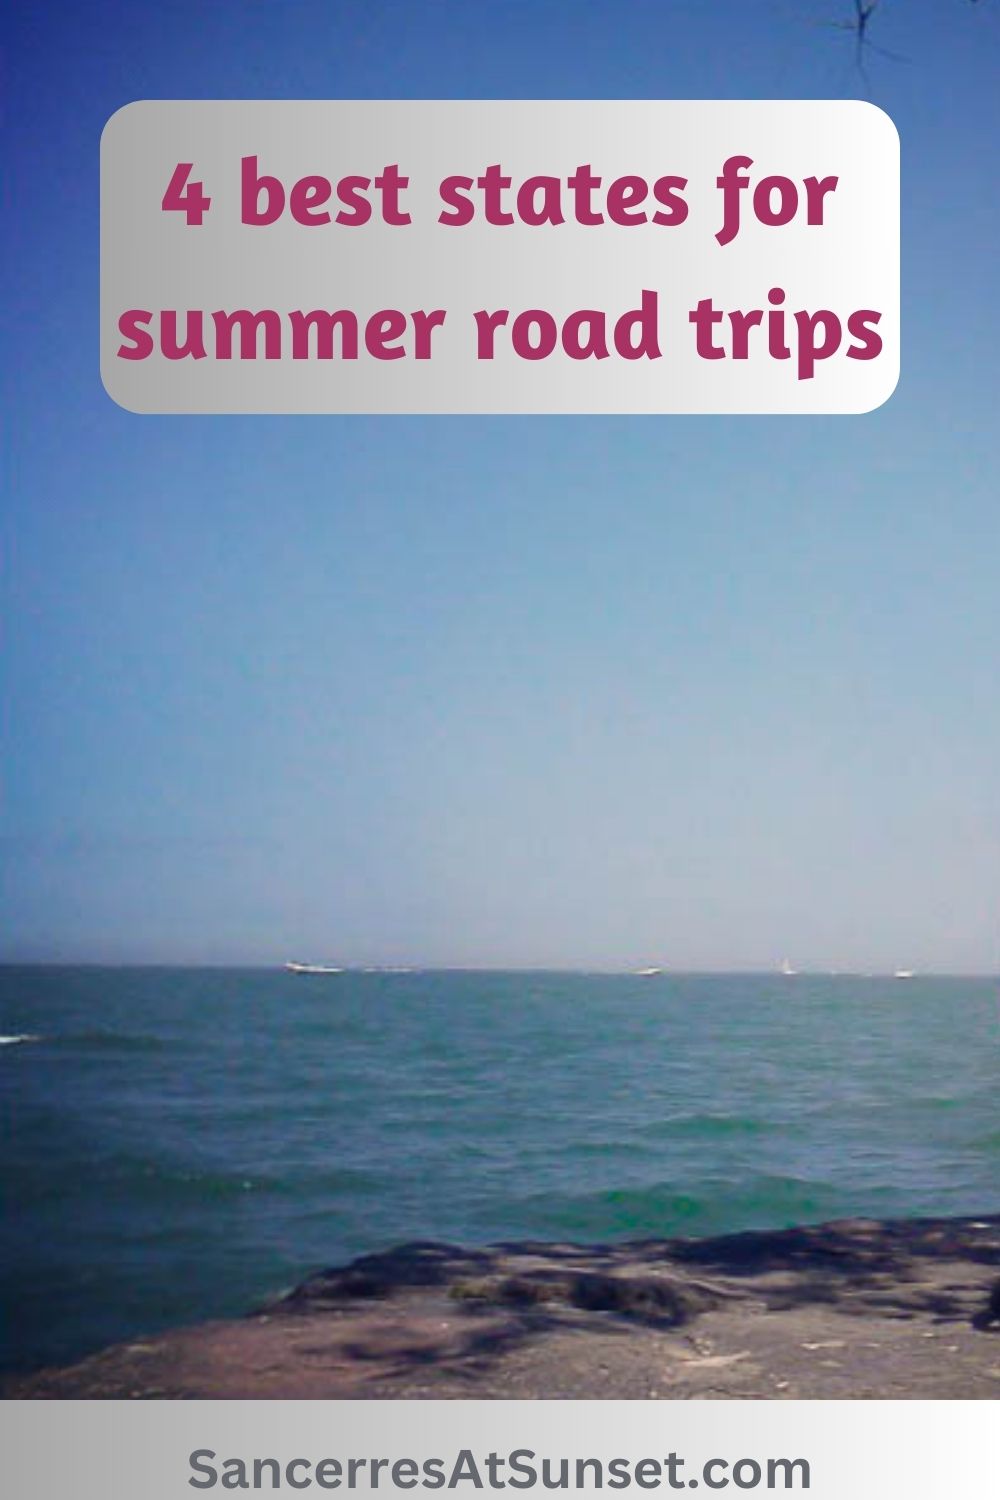 4 Best States for Summer Road Trips